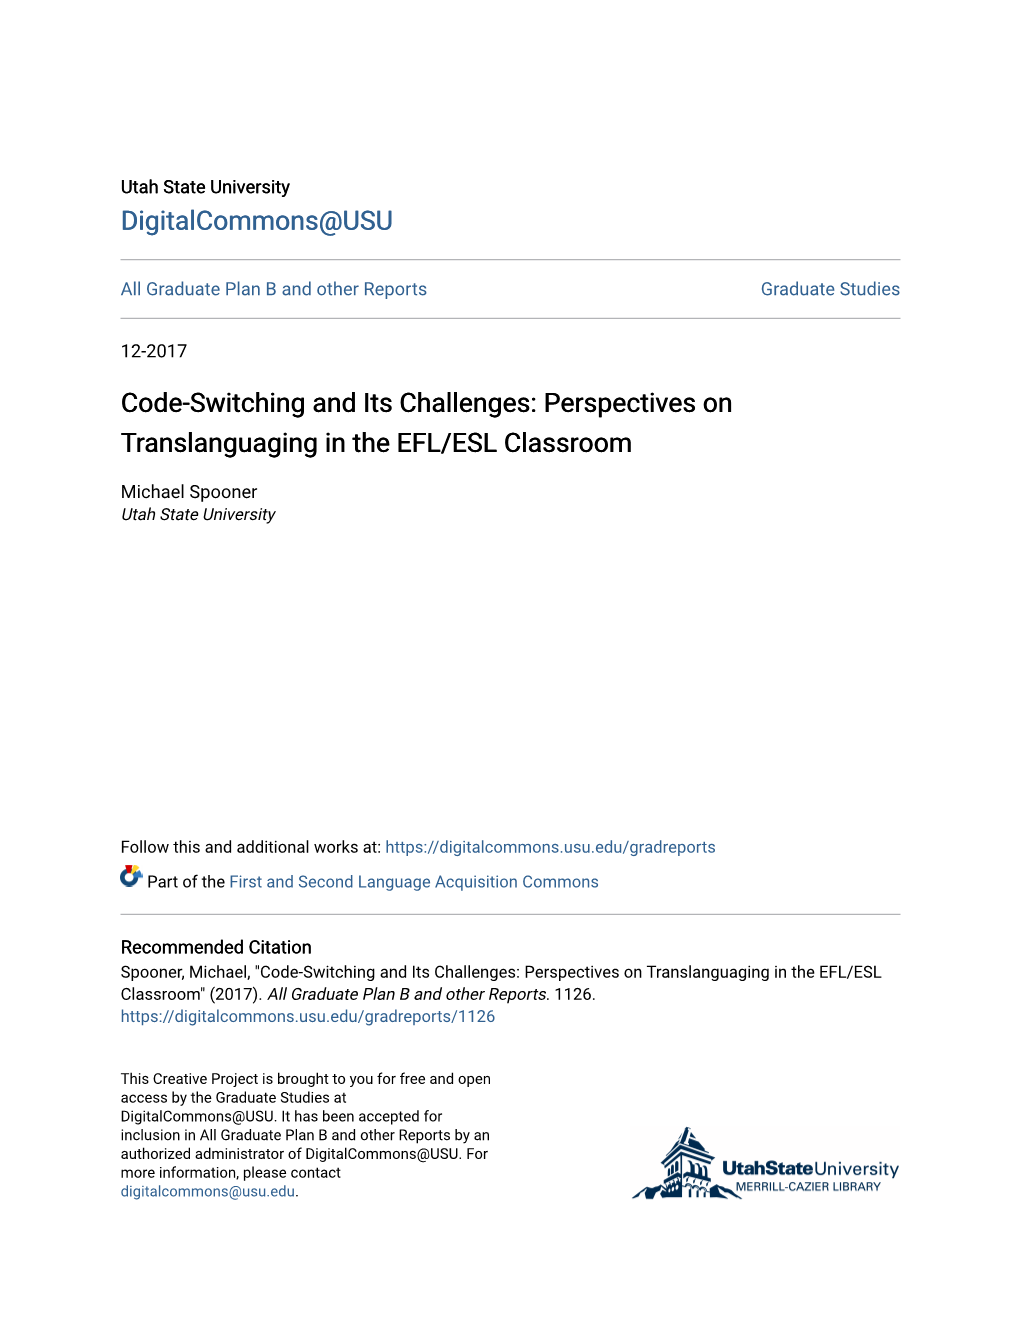 Code-Switching and Its Challenges: Perspectives on Translanguaging in the EFL/ESL Classroom